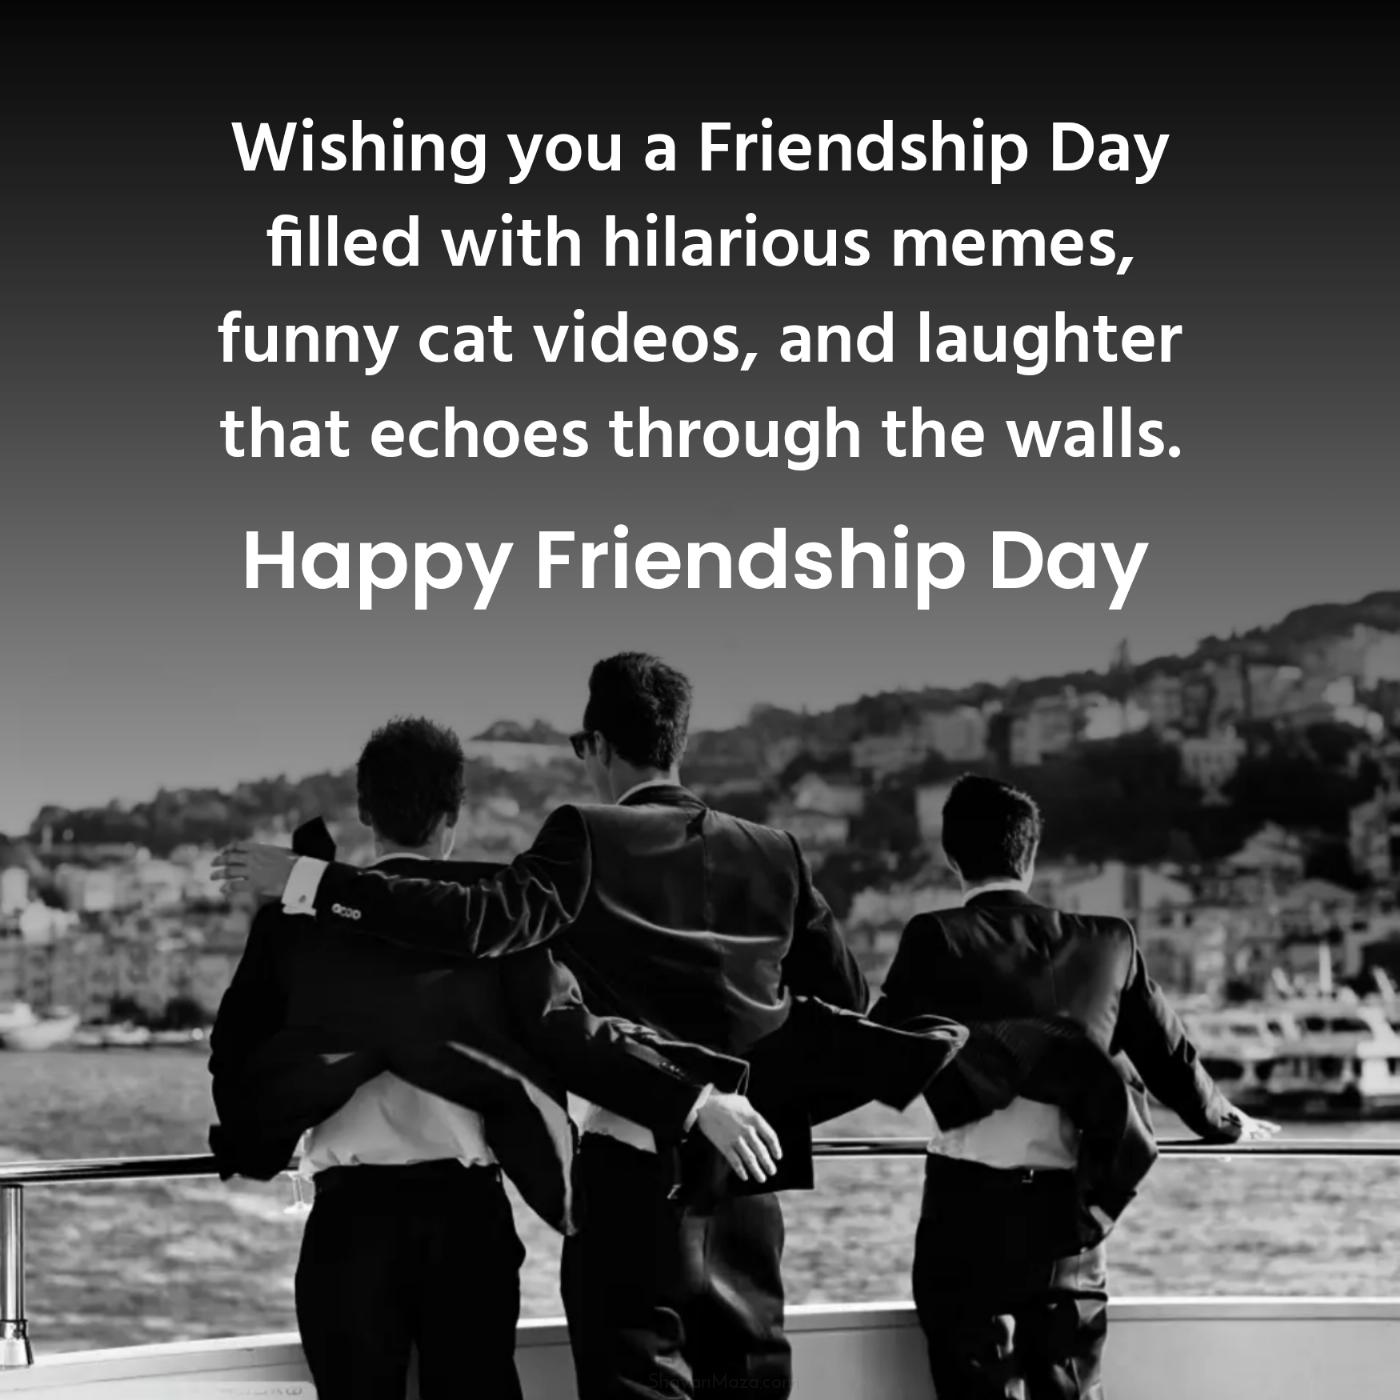 Wishing you a Friendship Day filled with hilarious memes funny cat videos